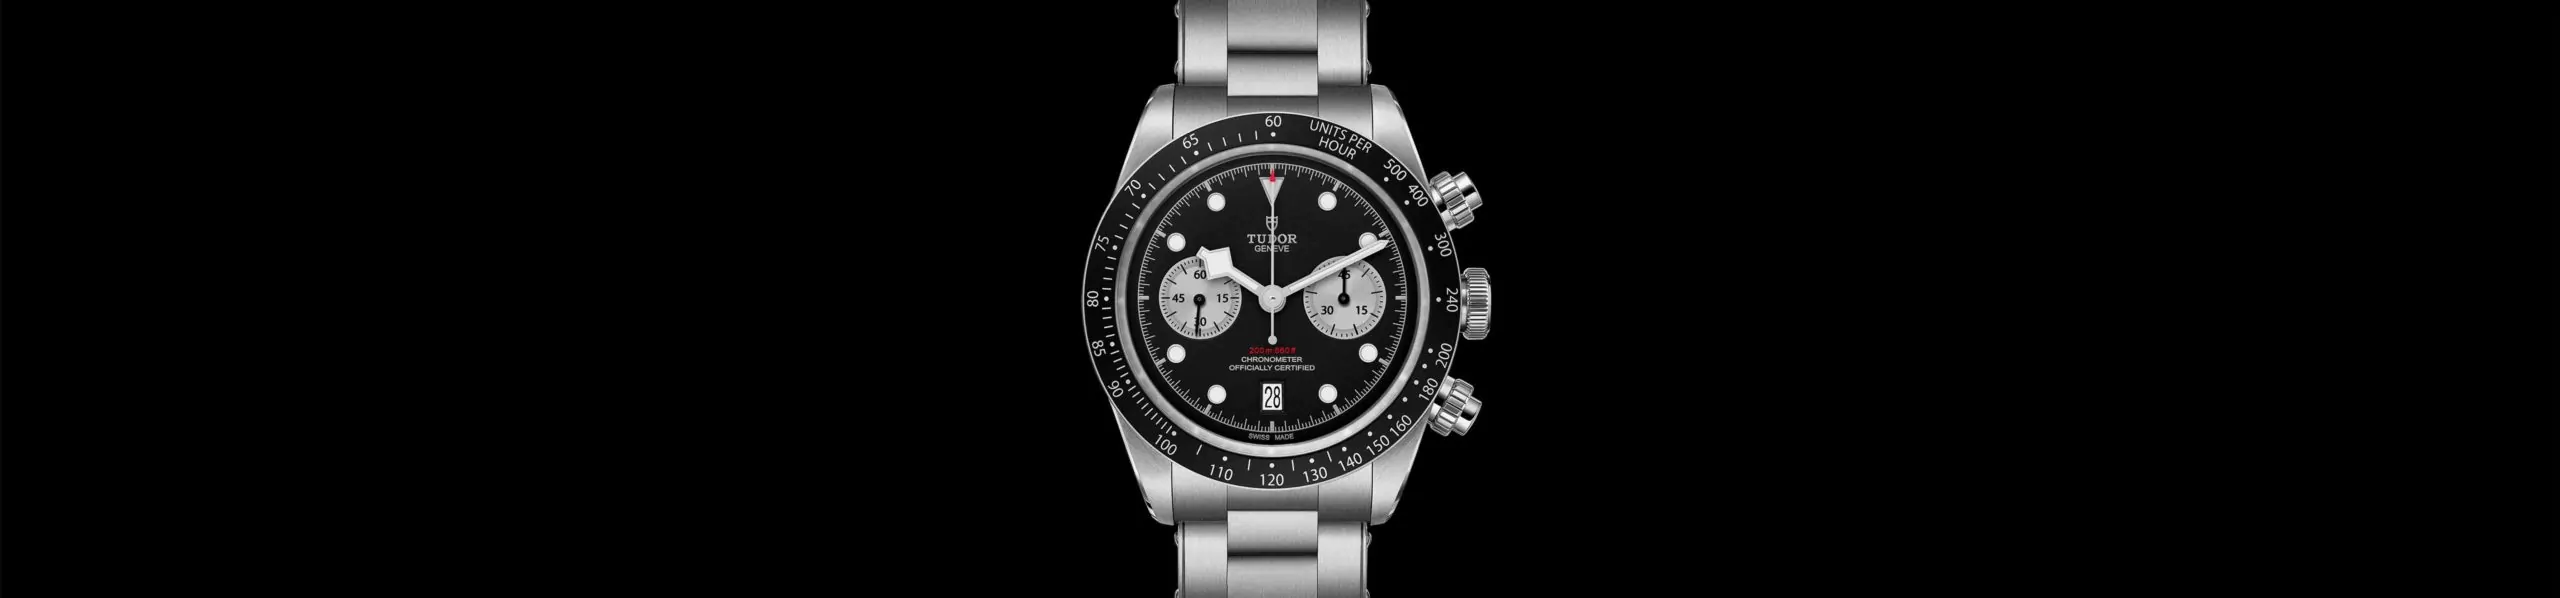 Discover TUDOR’s Spectacular New Collection of Black Bay Models